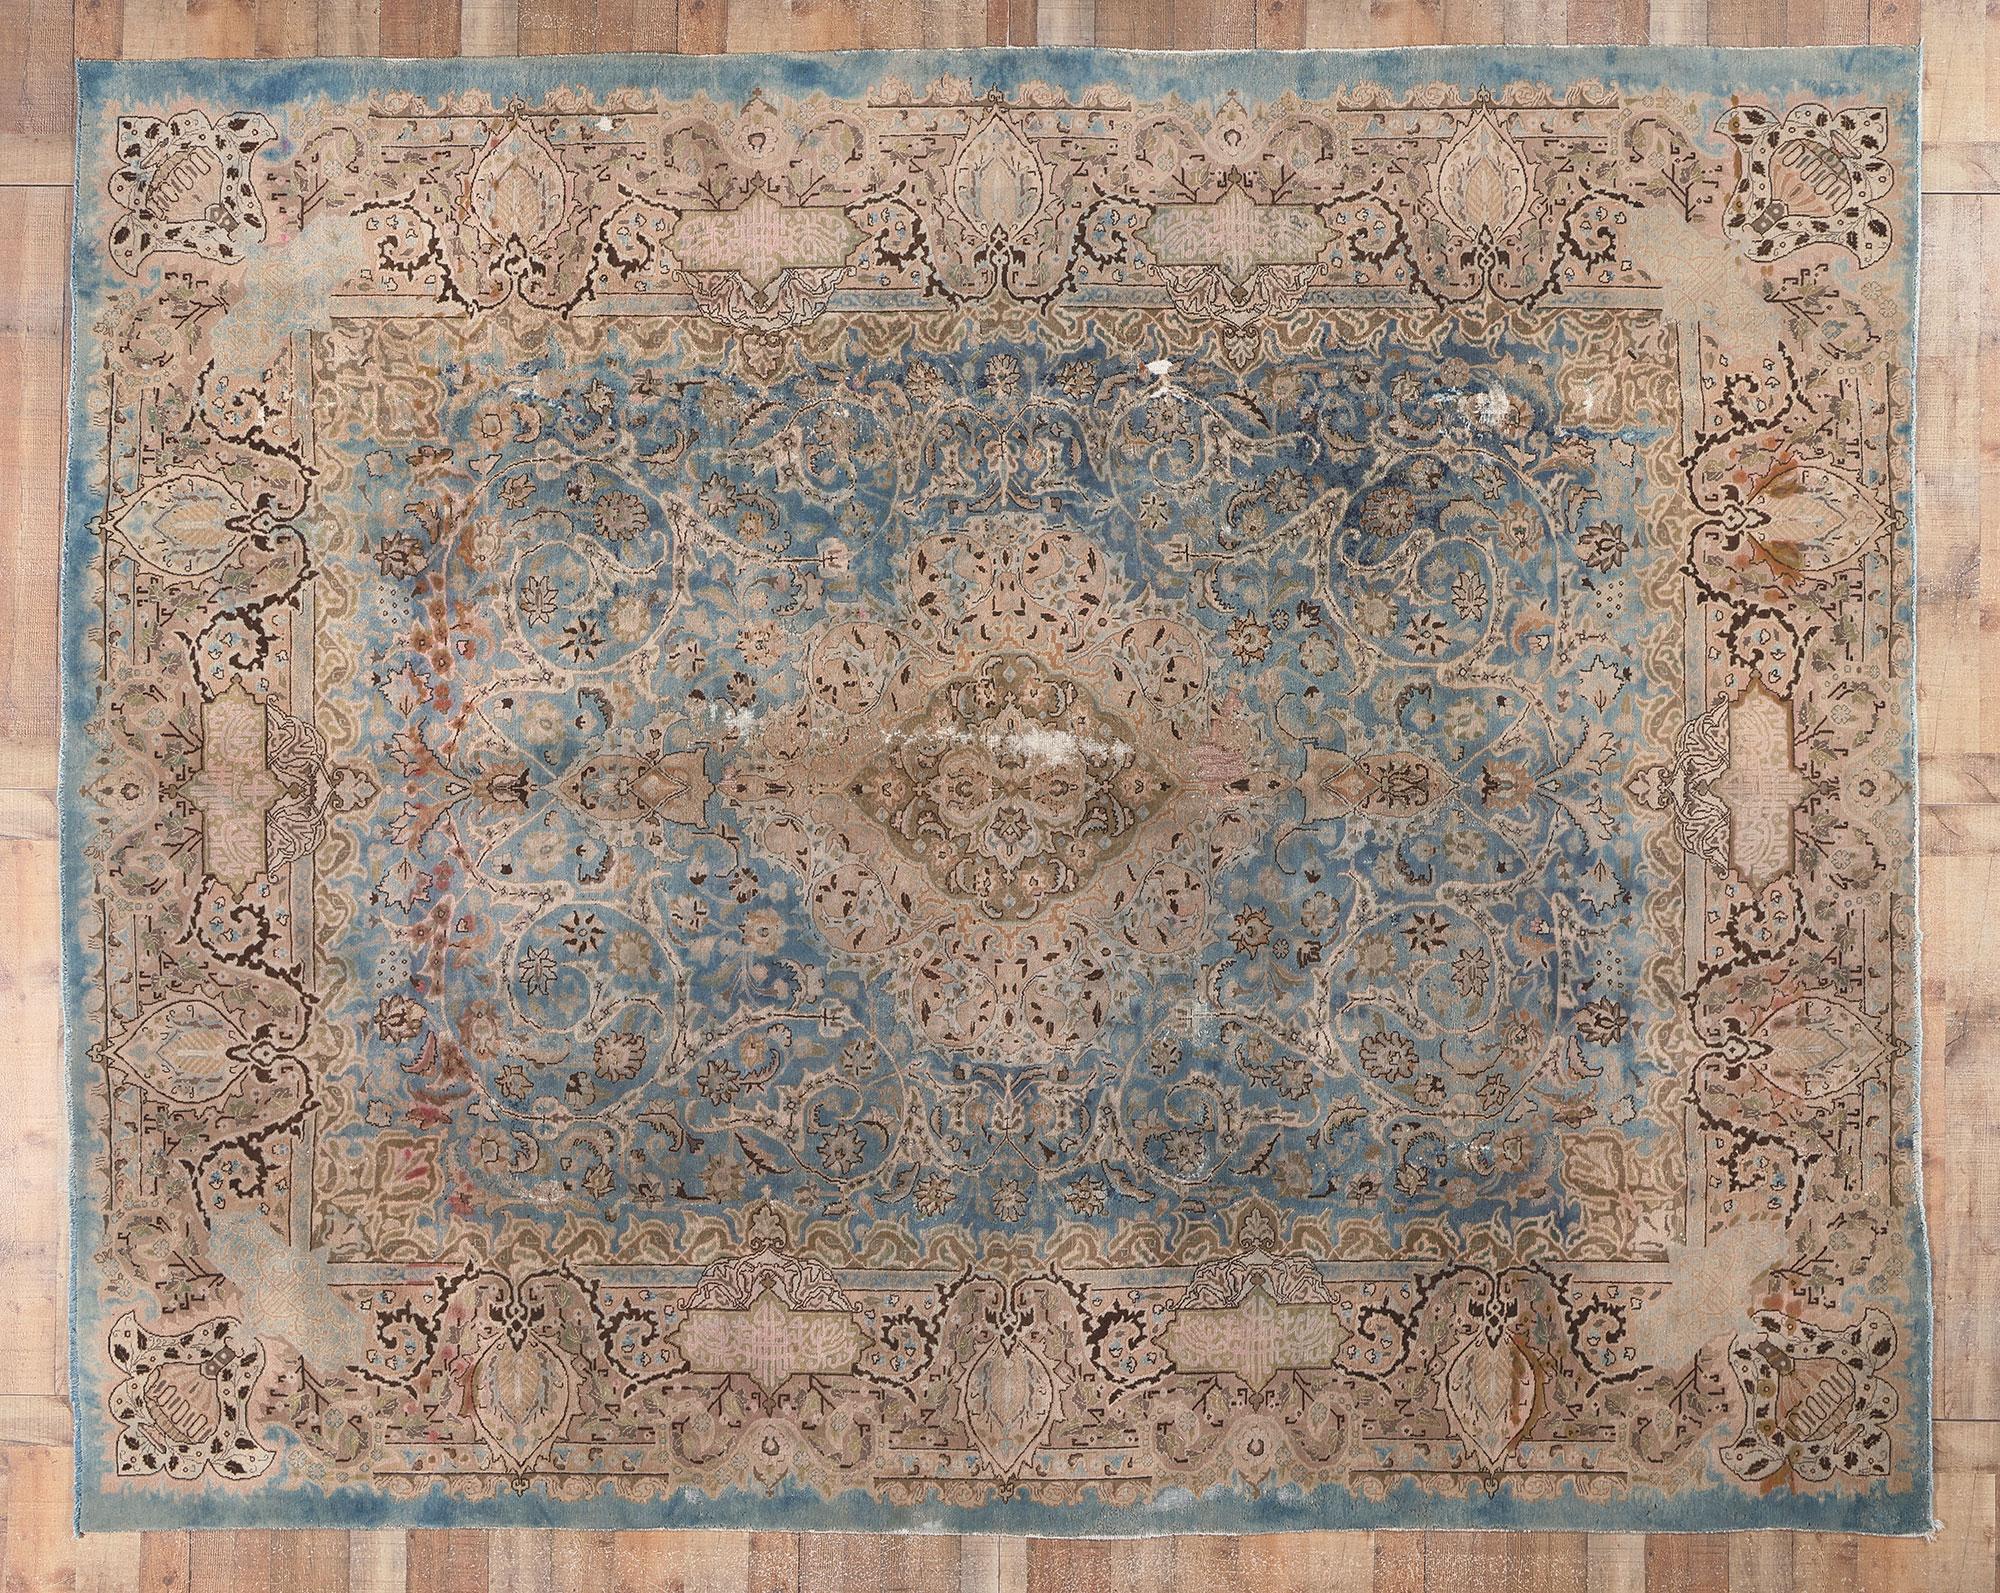 78591 Vintage Persian Kashan Kashmar Rug with Zir Khaki Design, 09'09 x 12'02. C?leverly composed with incredible detail and texture, this hand knotted vintage Persian Kashan rug is a captivating vision of woven beauty. The Zir Khaki design and